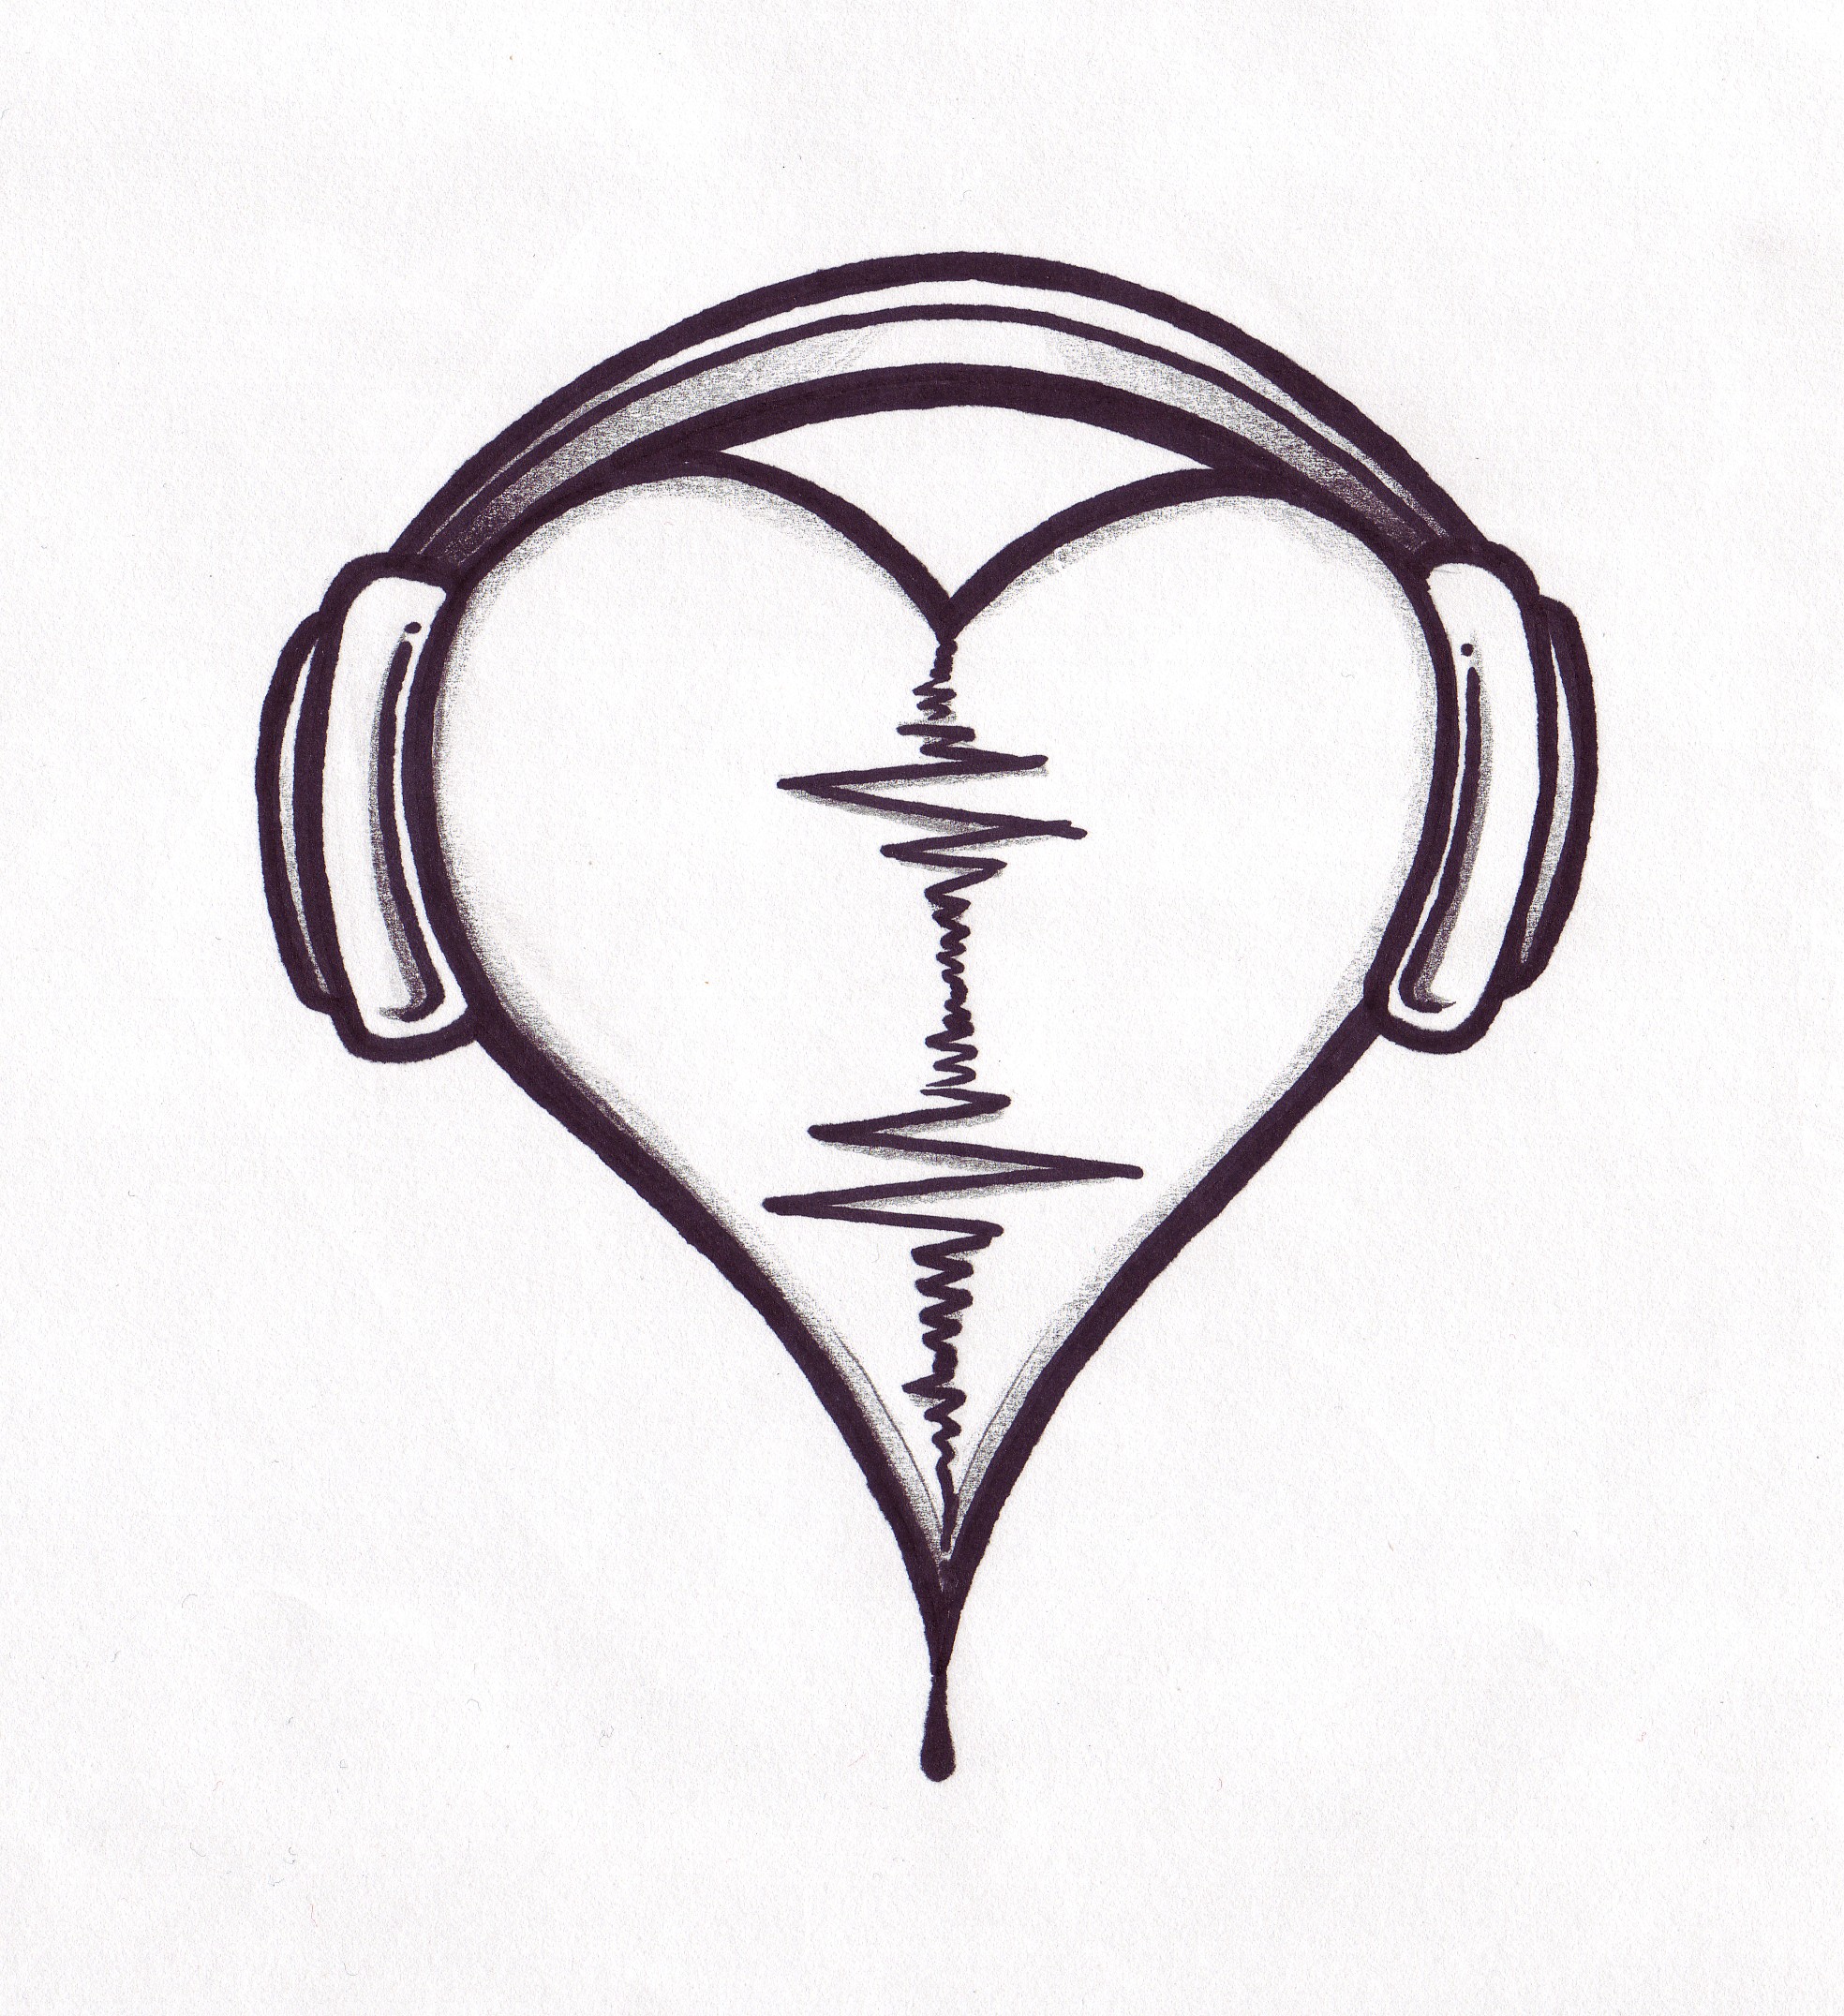 Audio Heart Tattoo Design By Pointofyou   Heart Tattoo Designs   Home